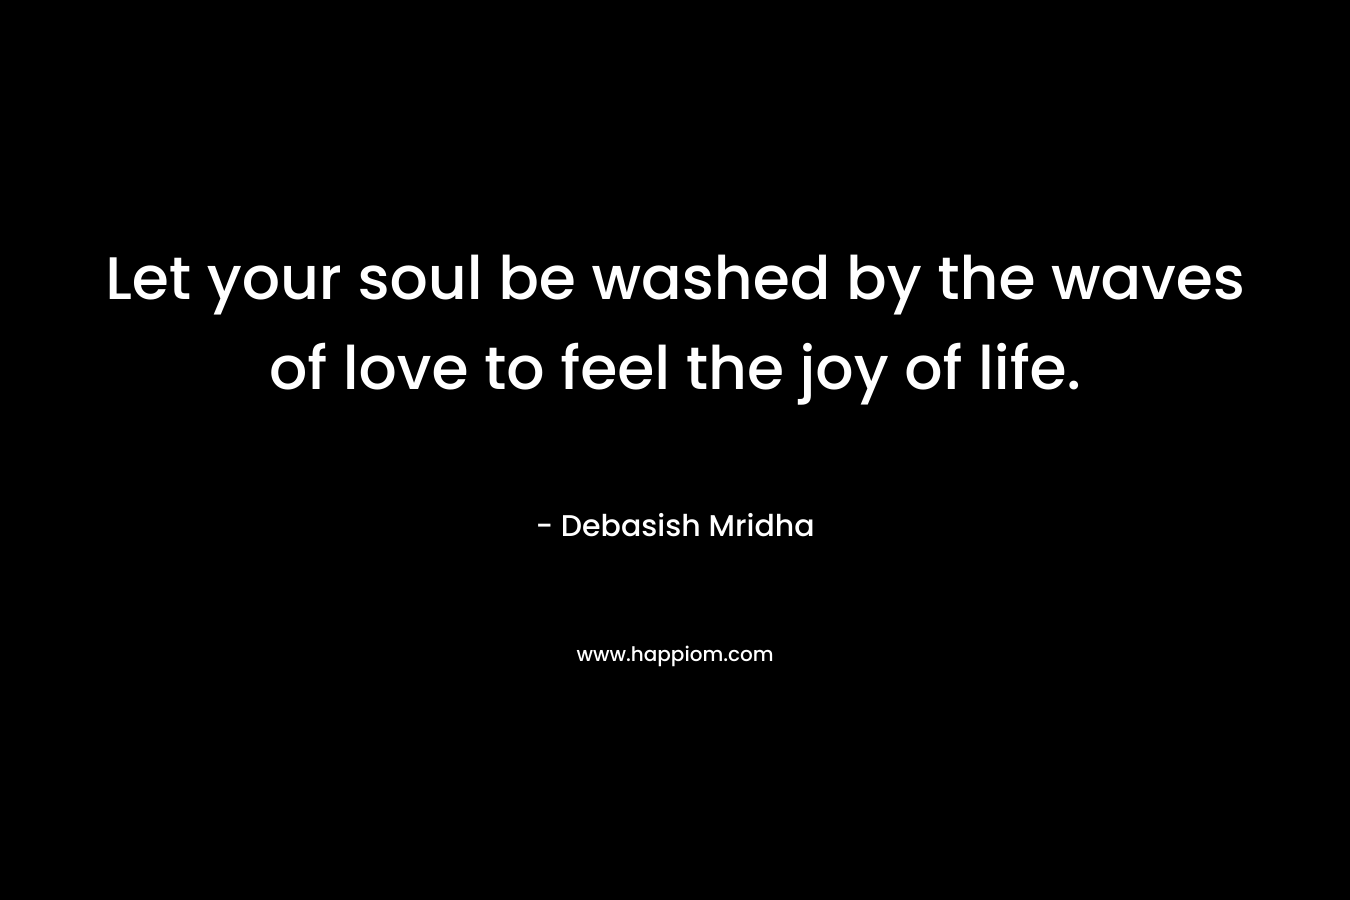 Let your soul be washed by the waves of love to feel the joy of life. – Debasish Mridha